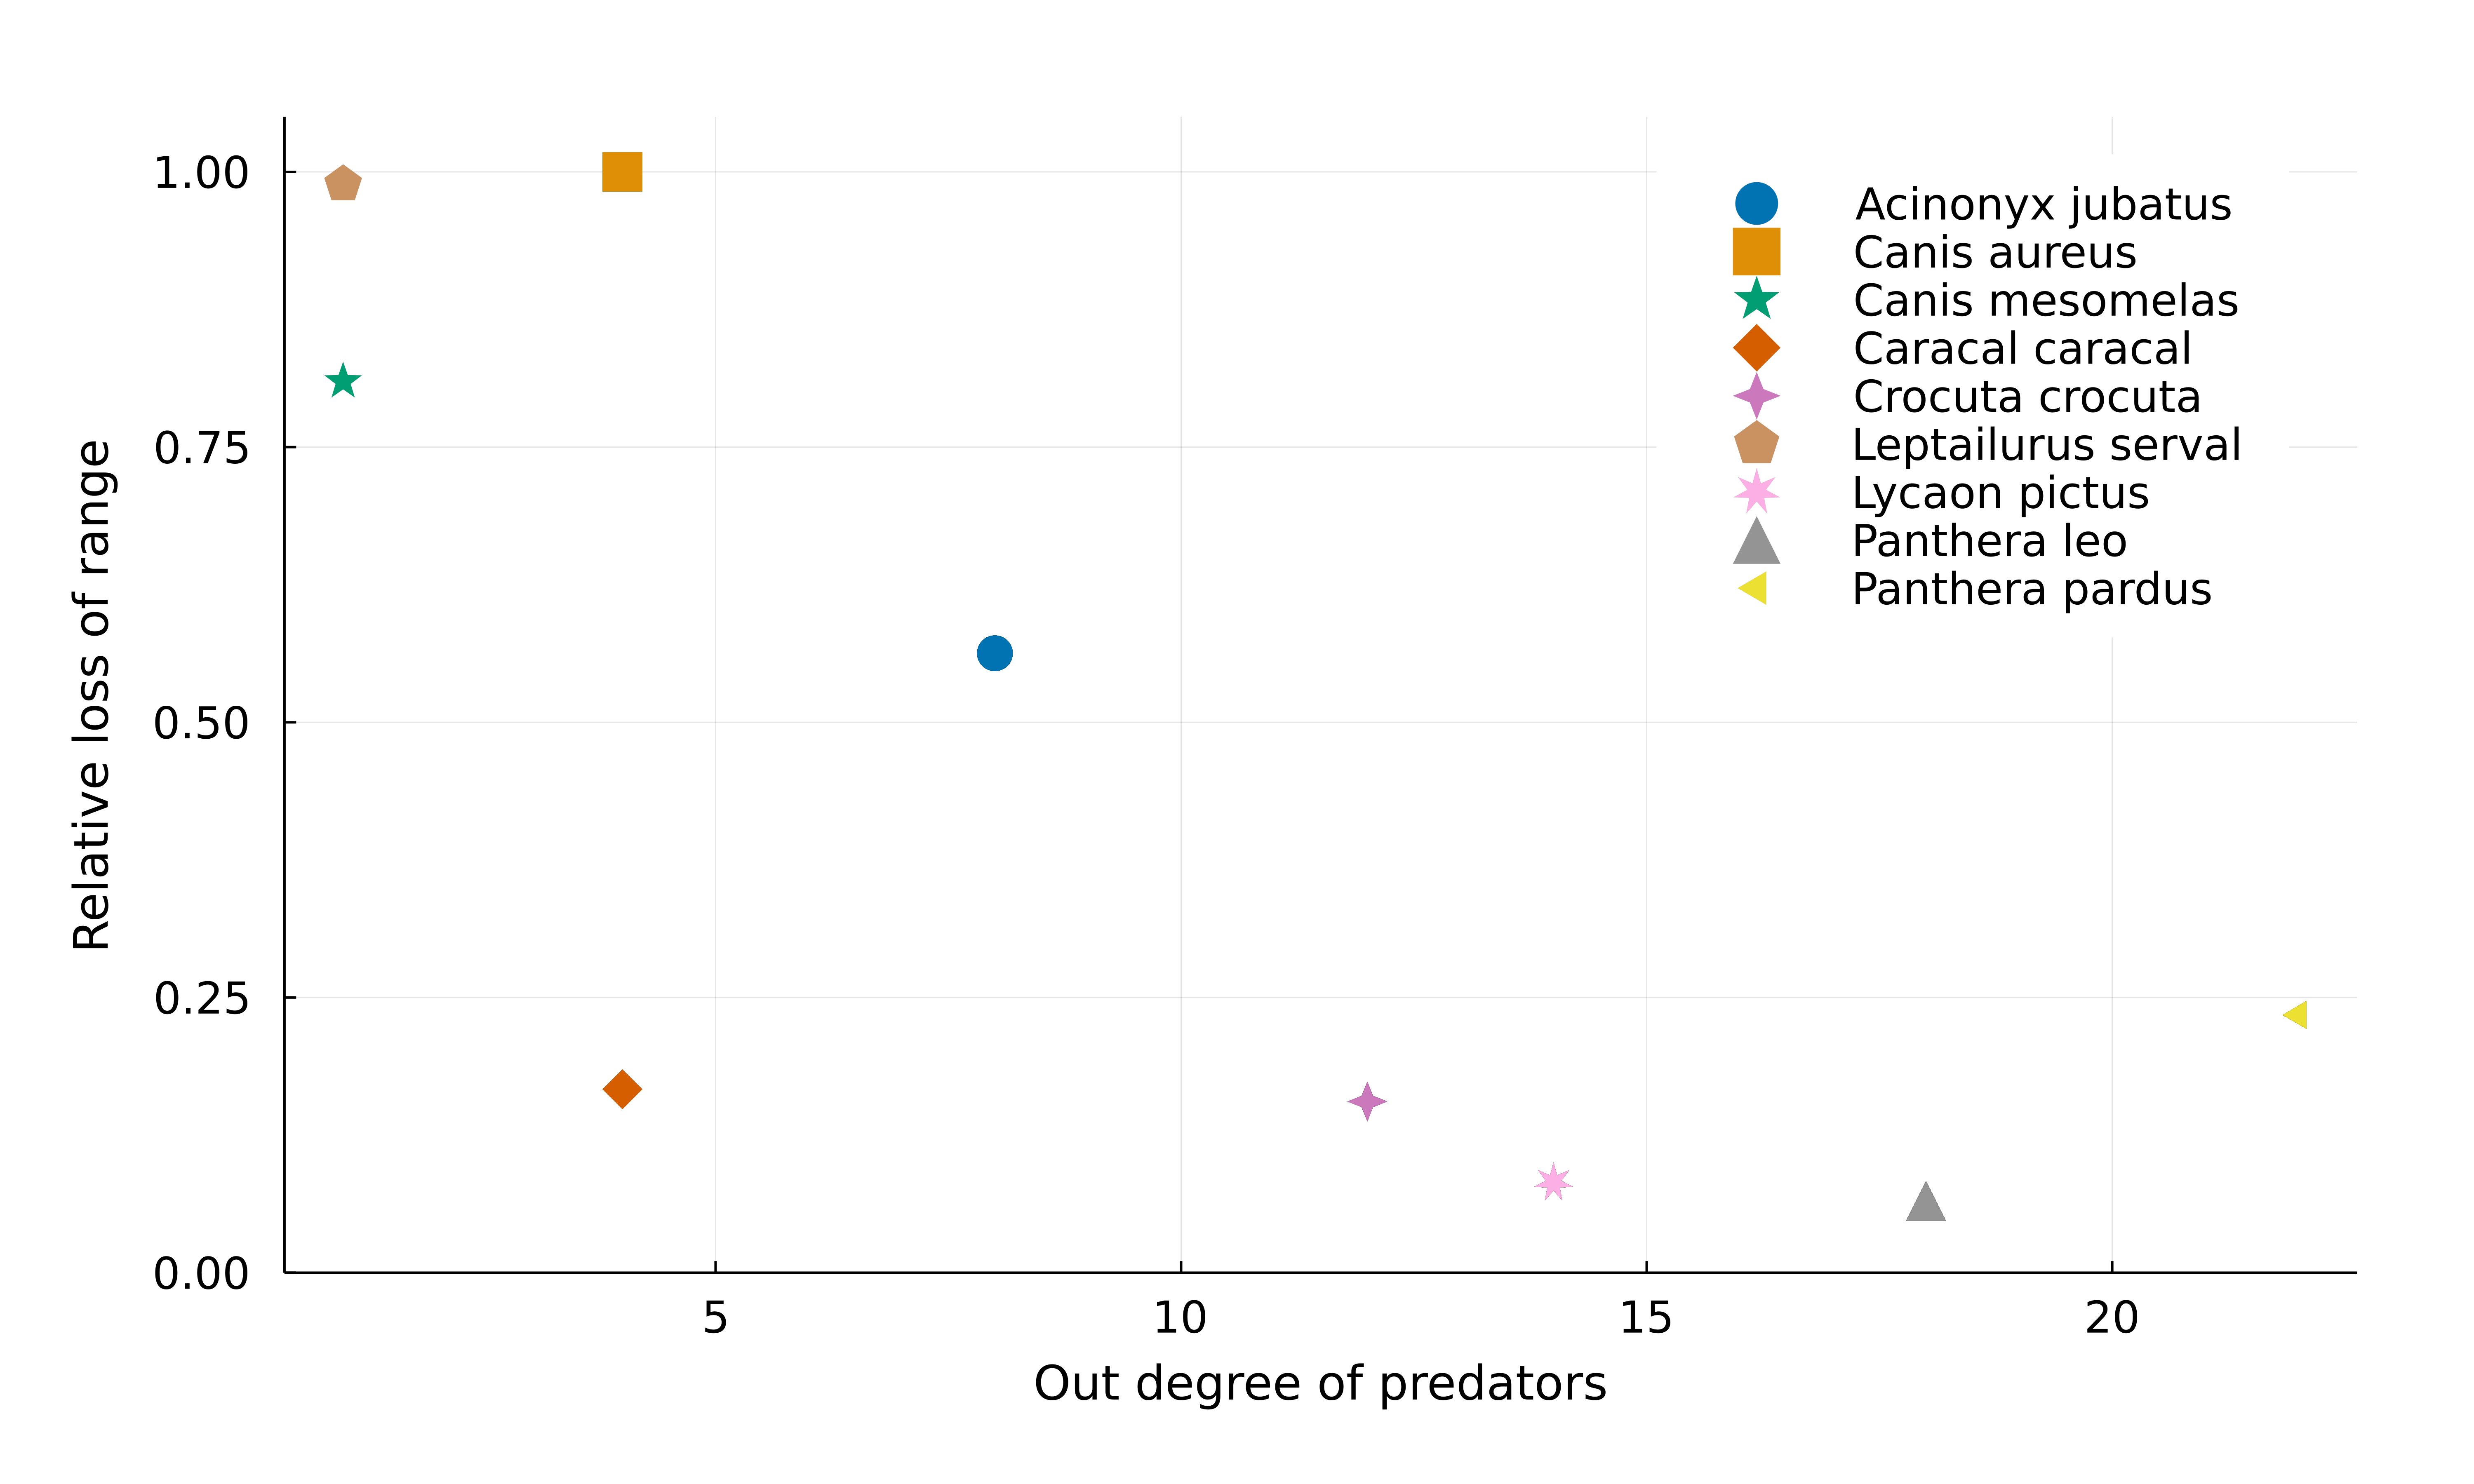 Figure 2: Negative relationship between the out degree of predator species and their relative range mismatch. More specialized predators “lose” a higher proportion of their ranges due to mismatches with the ranges of their preys.